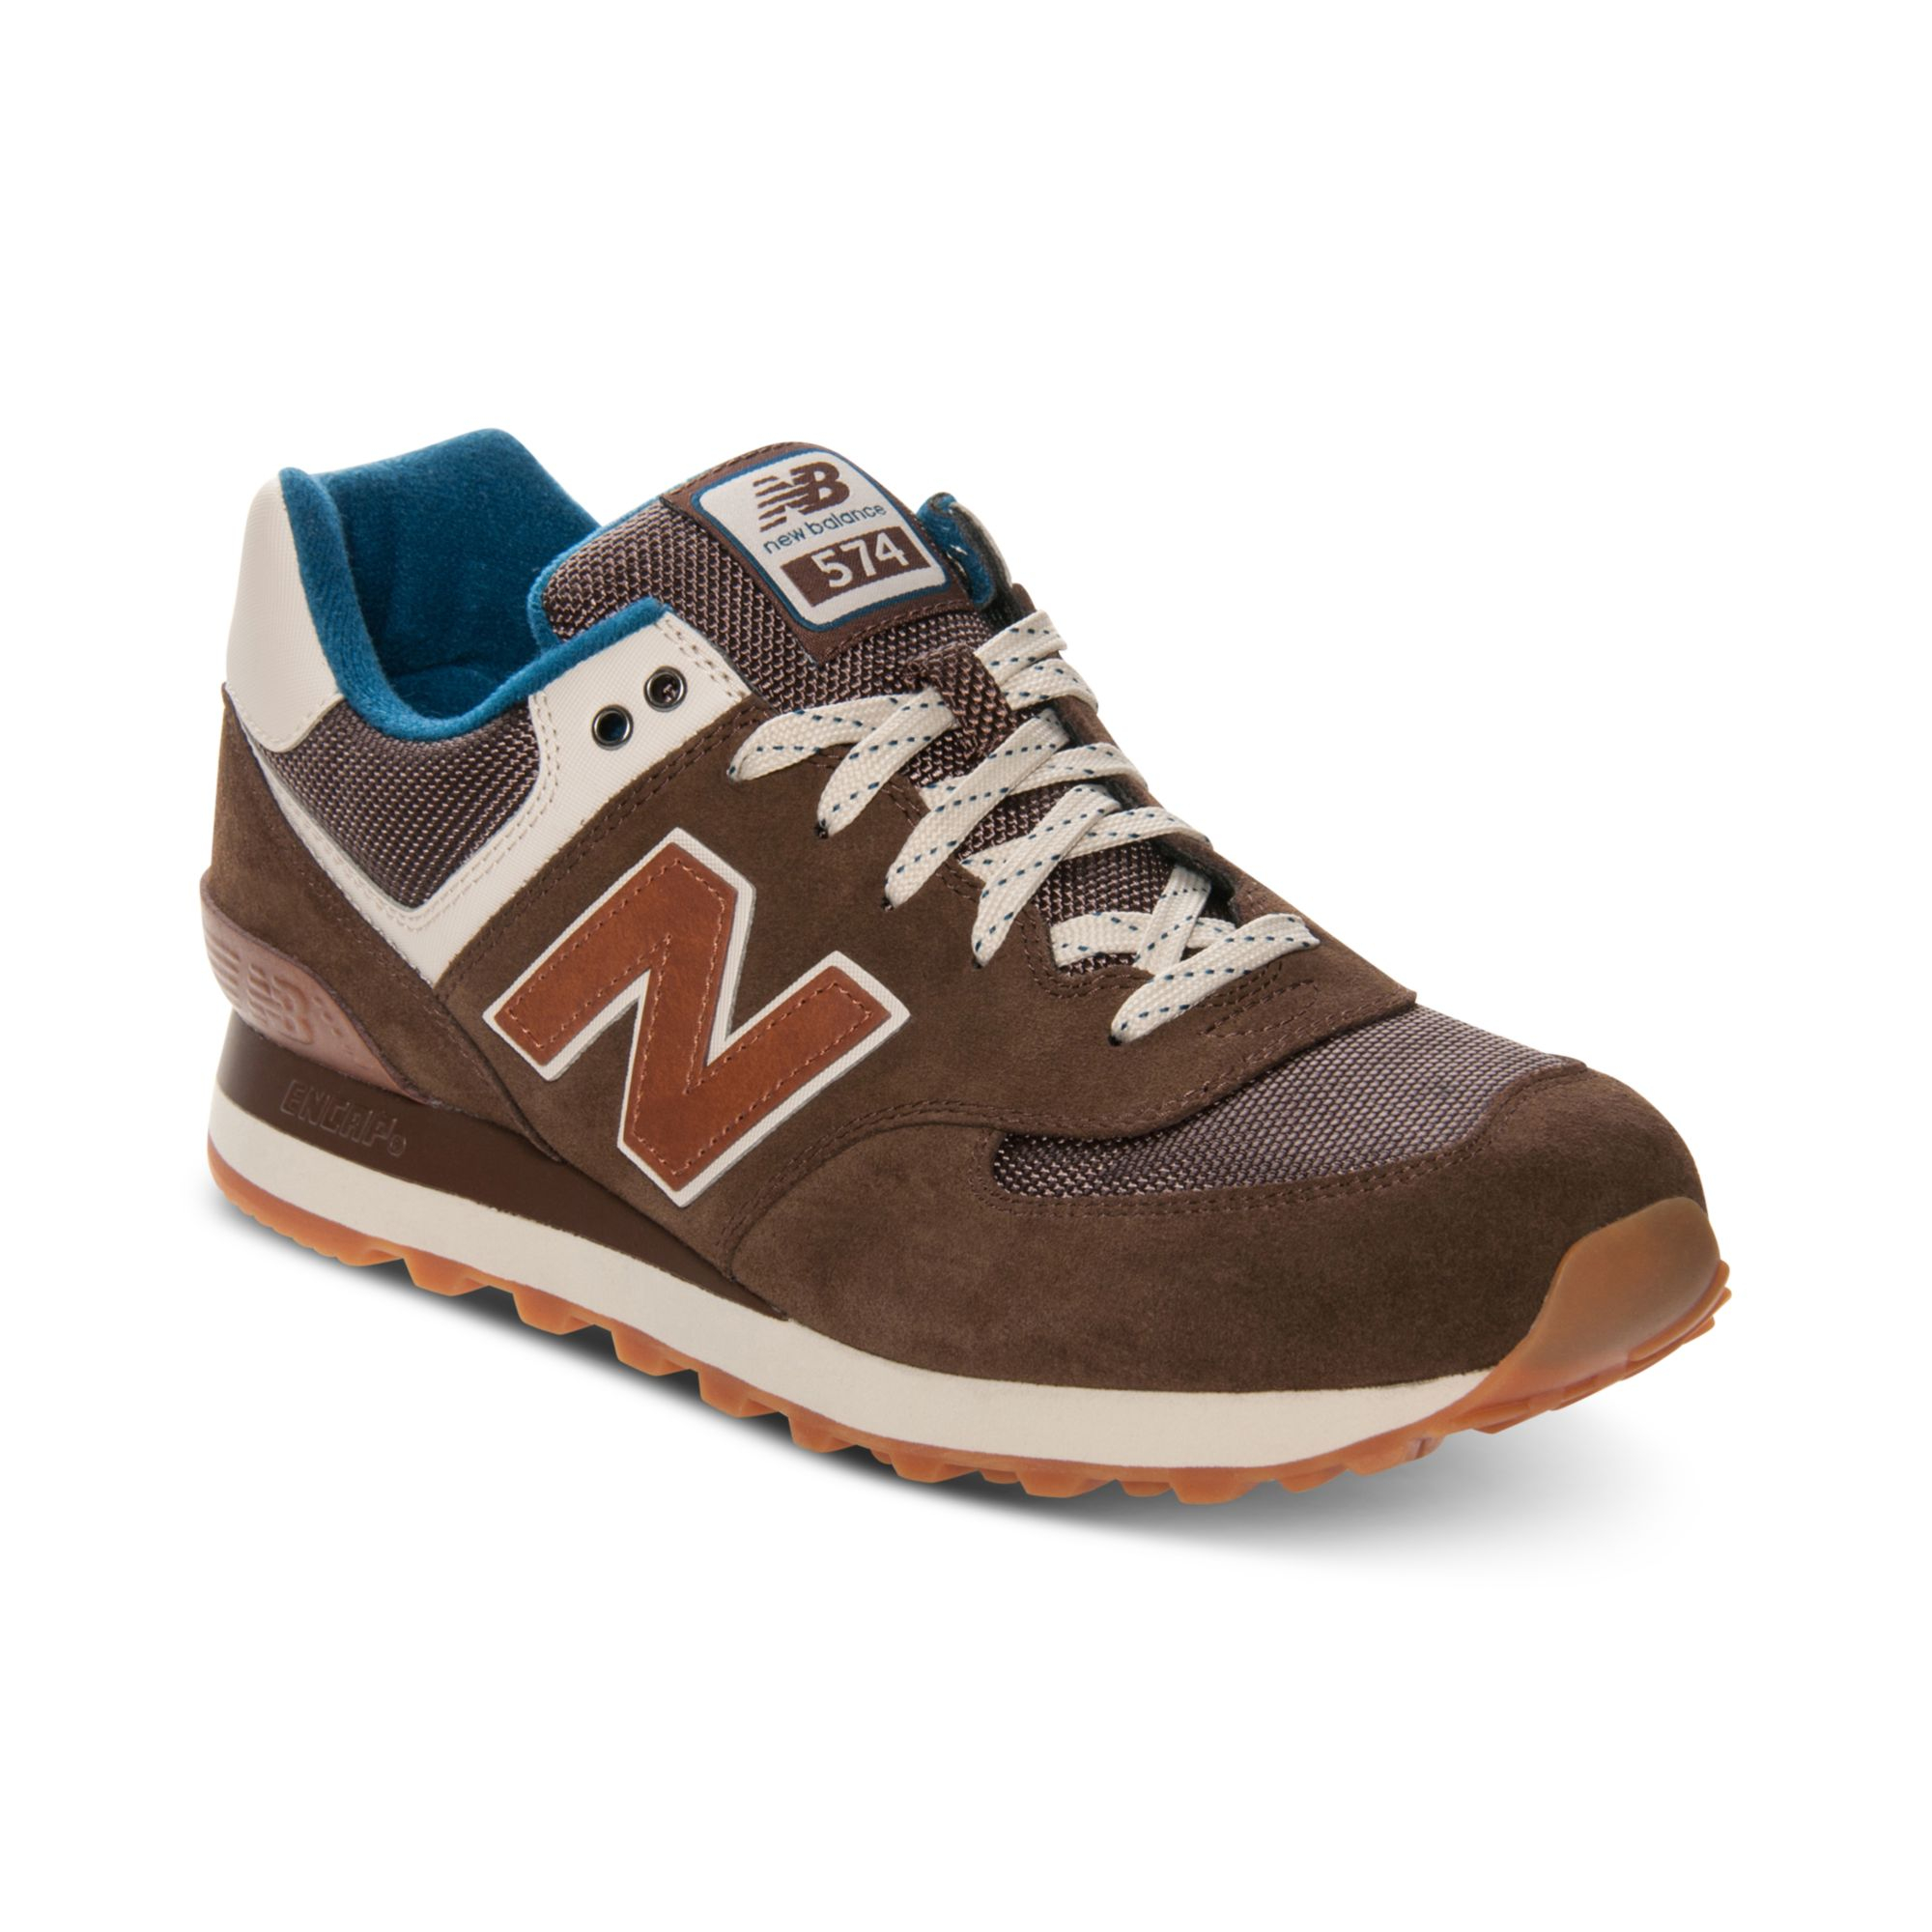 New Balance Mens 574 Casual Sneakers From Finish Line in Brown/Navy ...